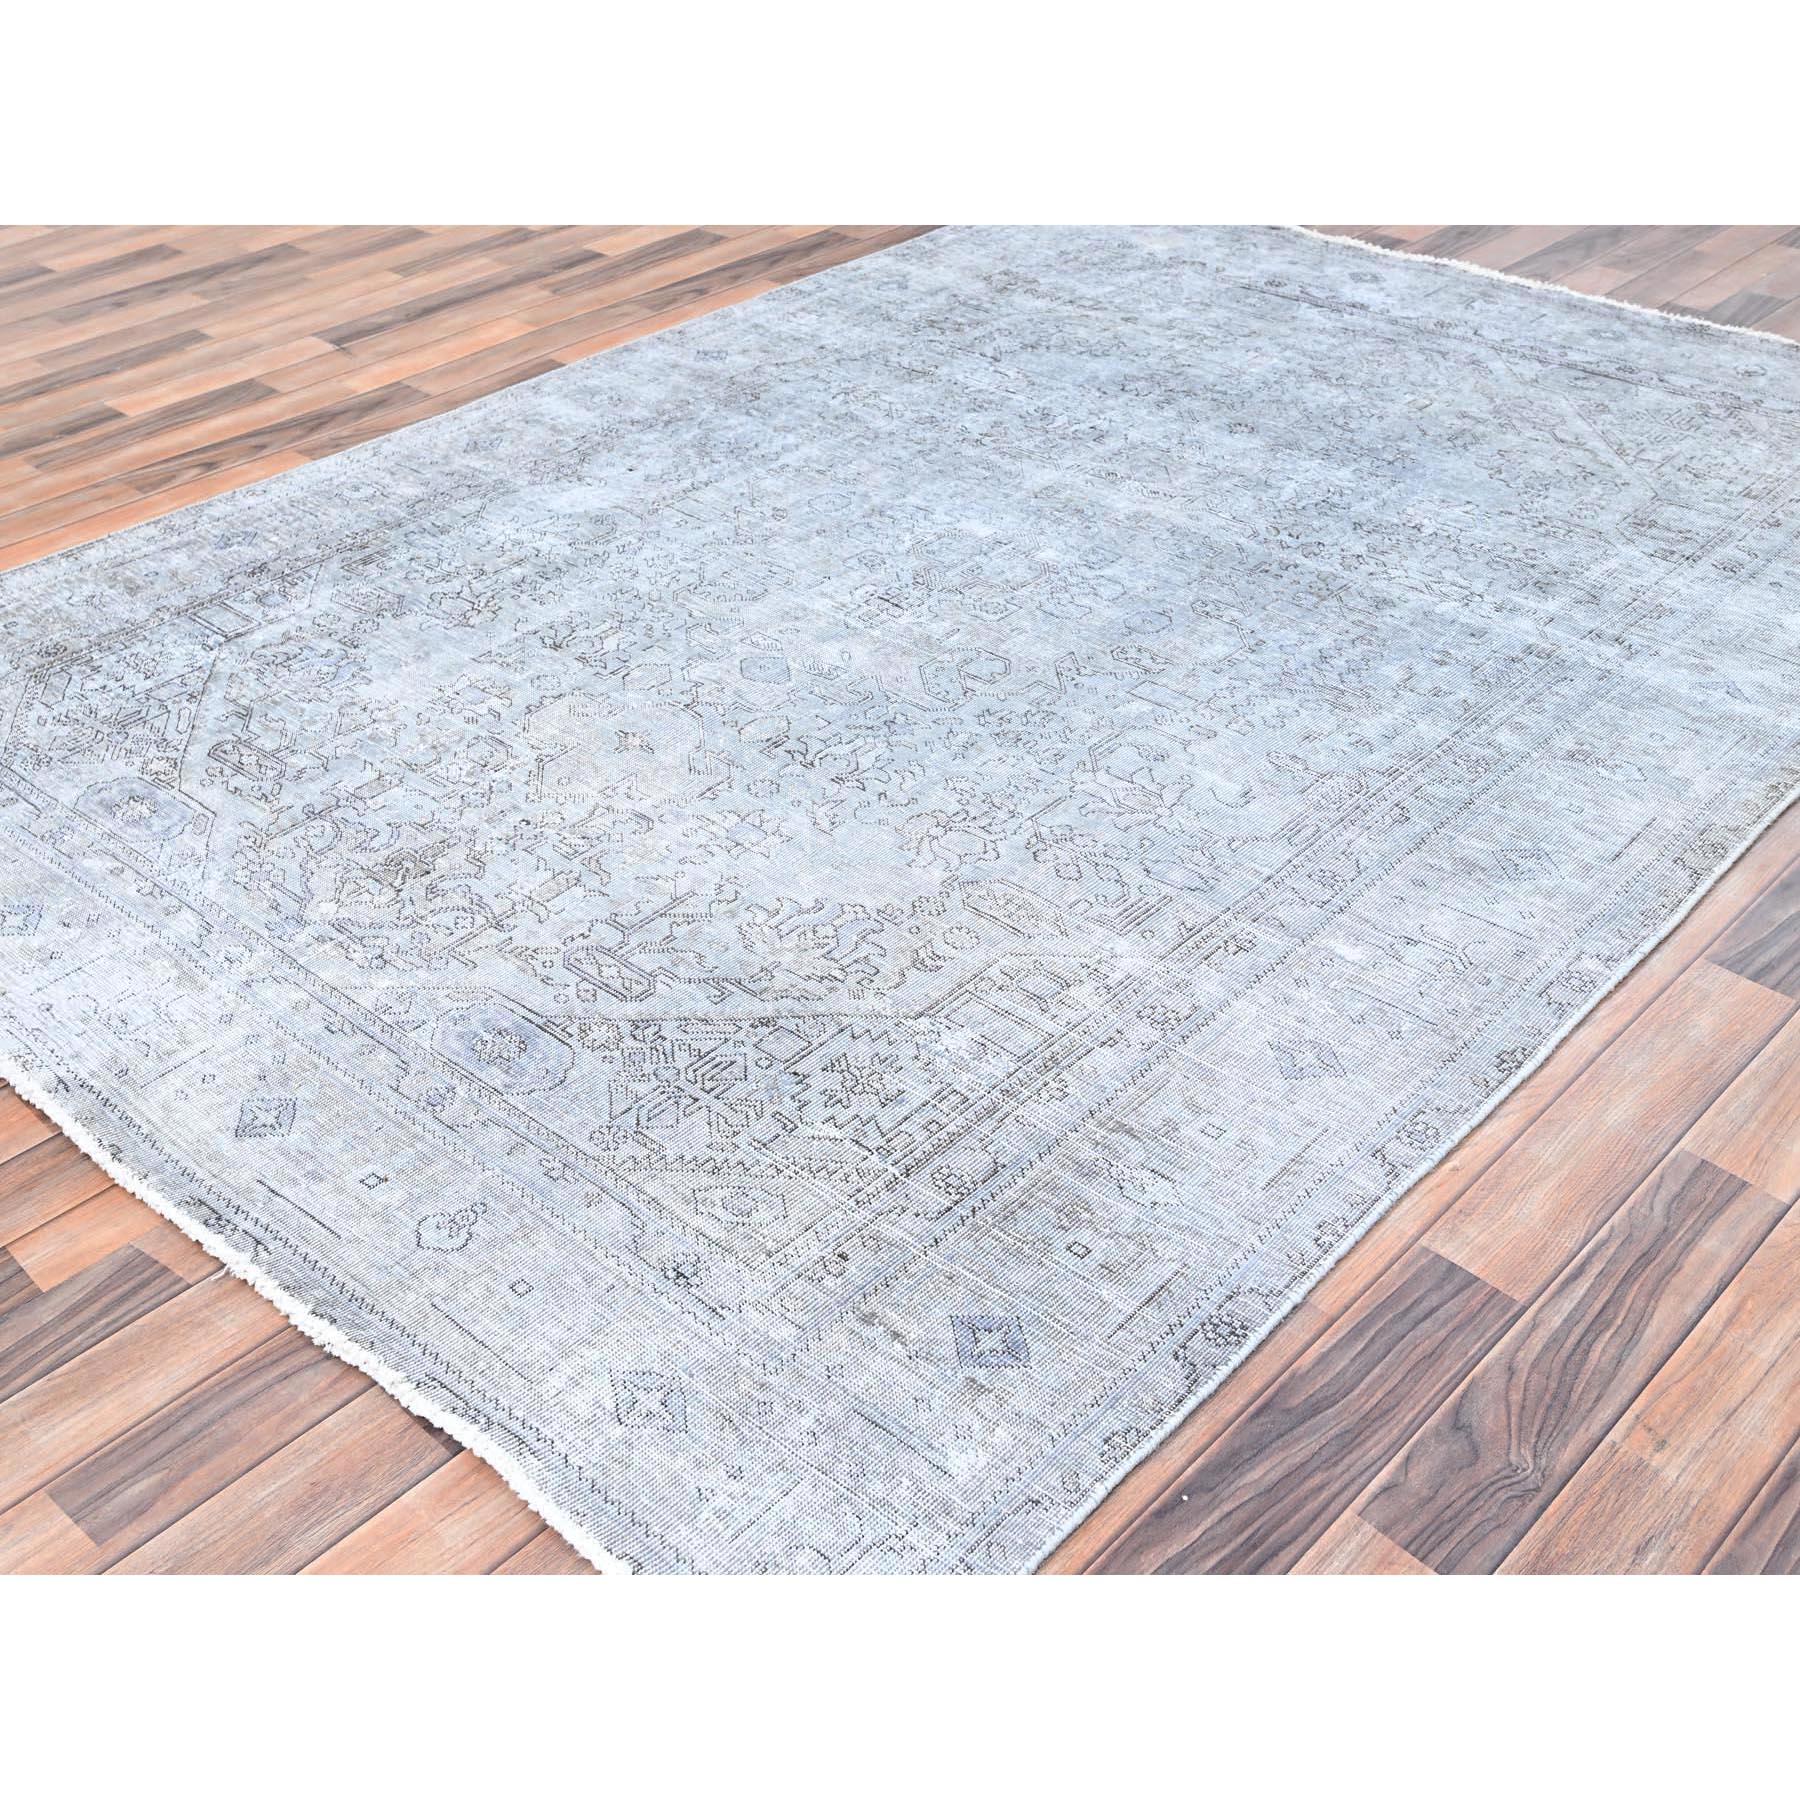 Ash Gray Vintage Persian Tabriz Distressed Worn Down Soft Wool Hand Knotted Rug In Fair Condition For Sale In Carlstadt, NJ